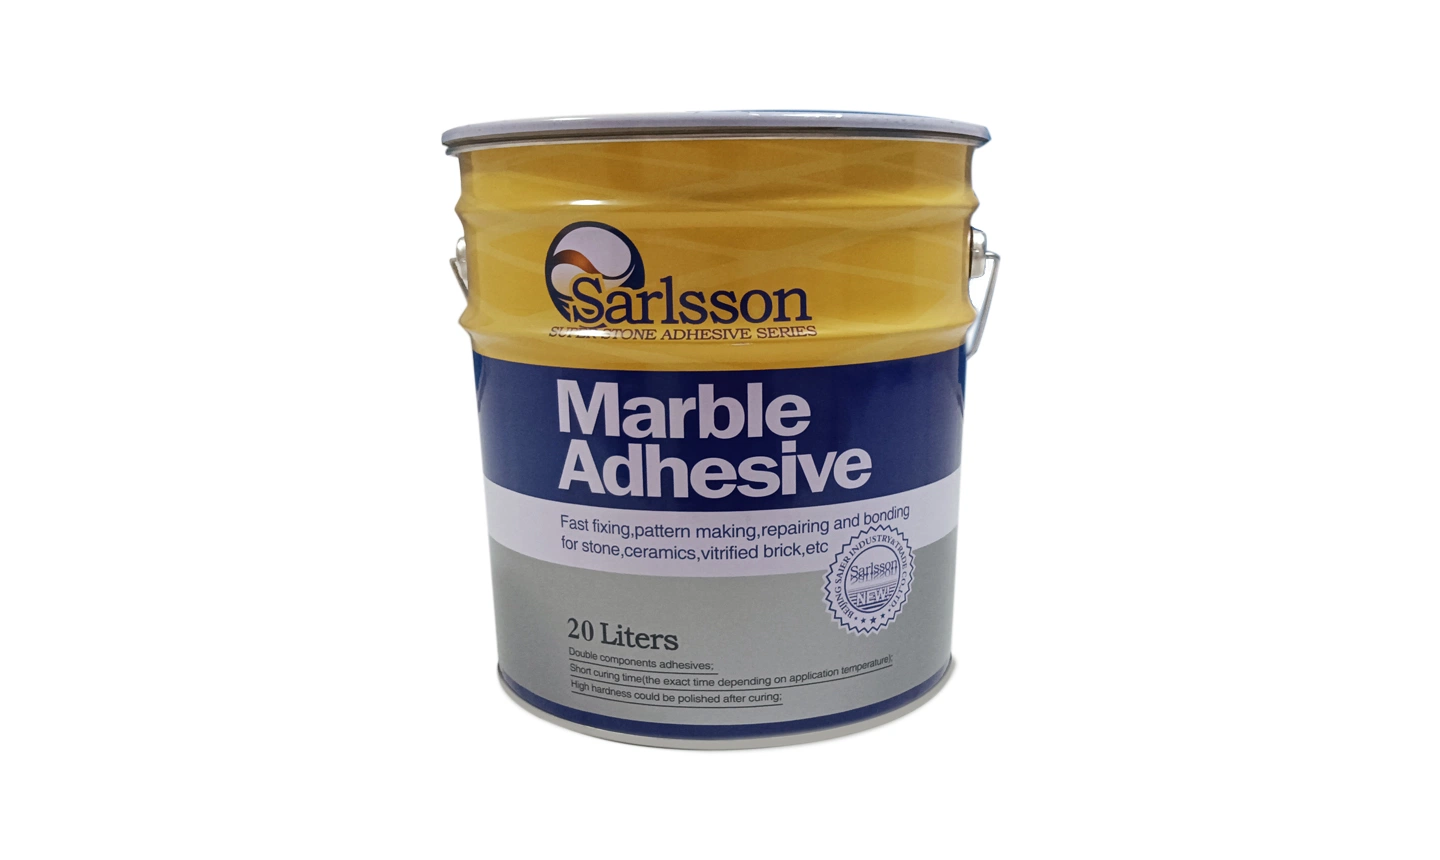 20L Super Strength Unsatuated Polyester Glue Adhesive for Marble and Granite